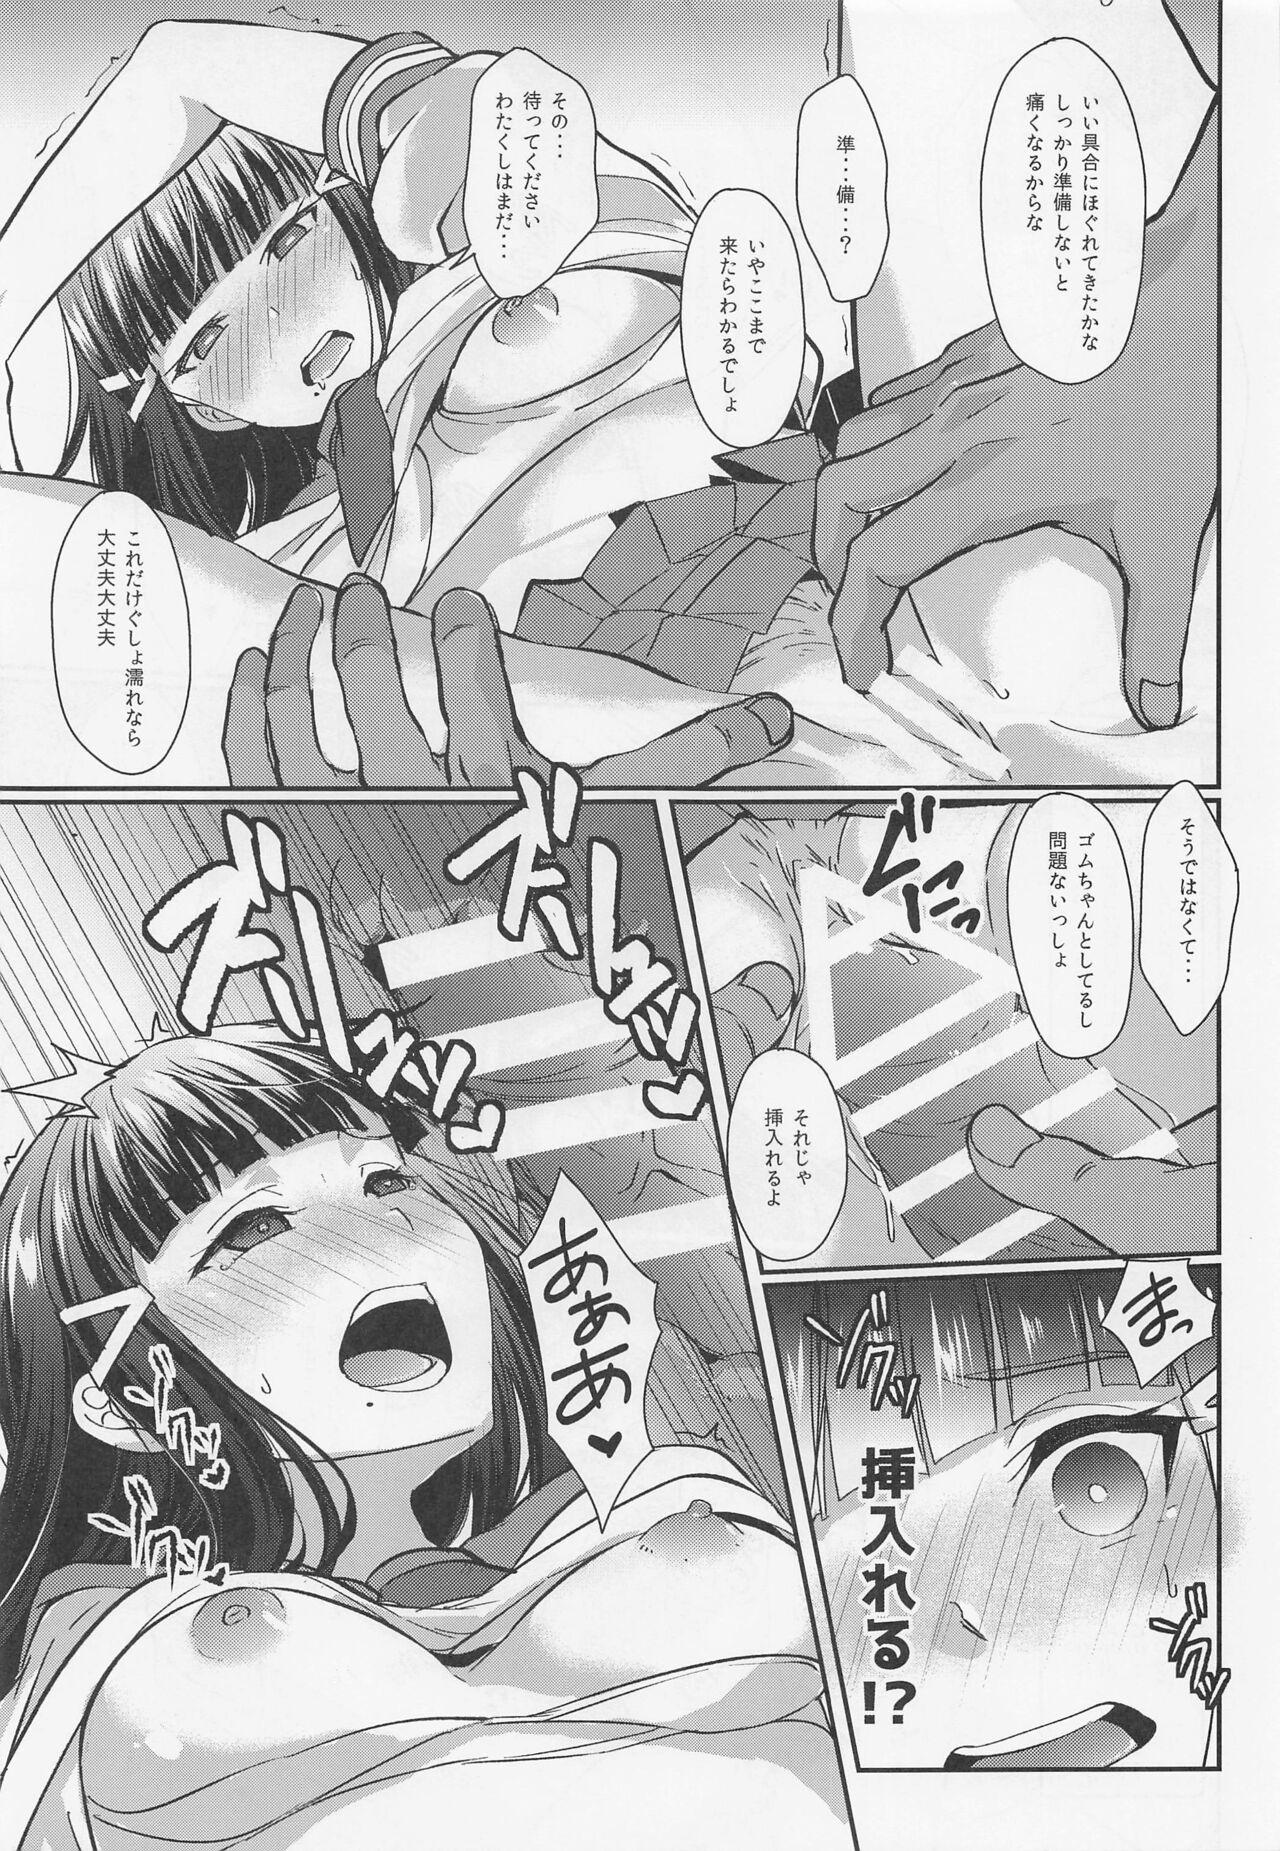 Mas Boiling First Love - Love live sunshine Babe - Page 10